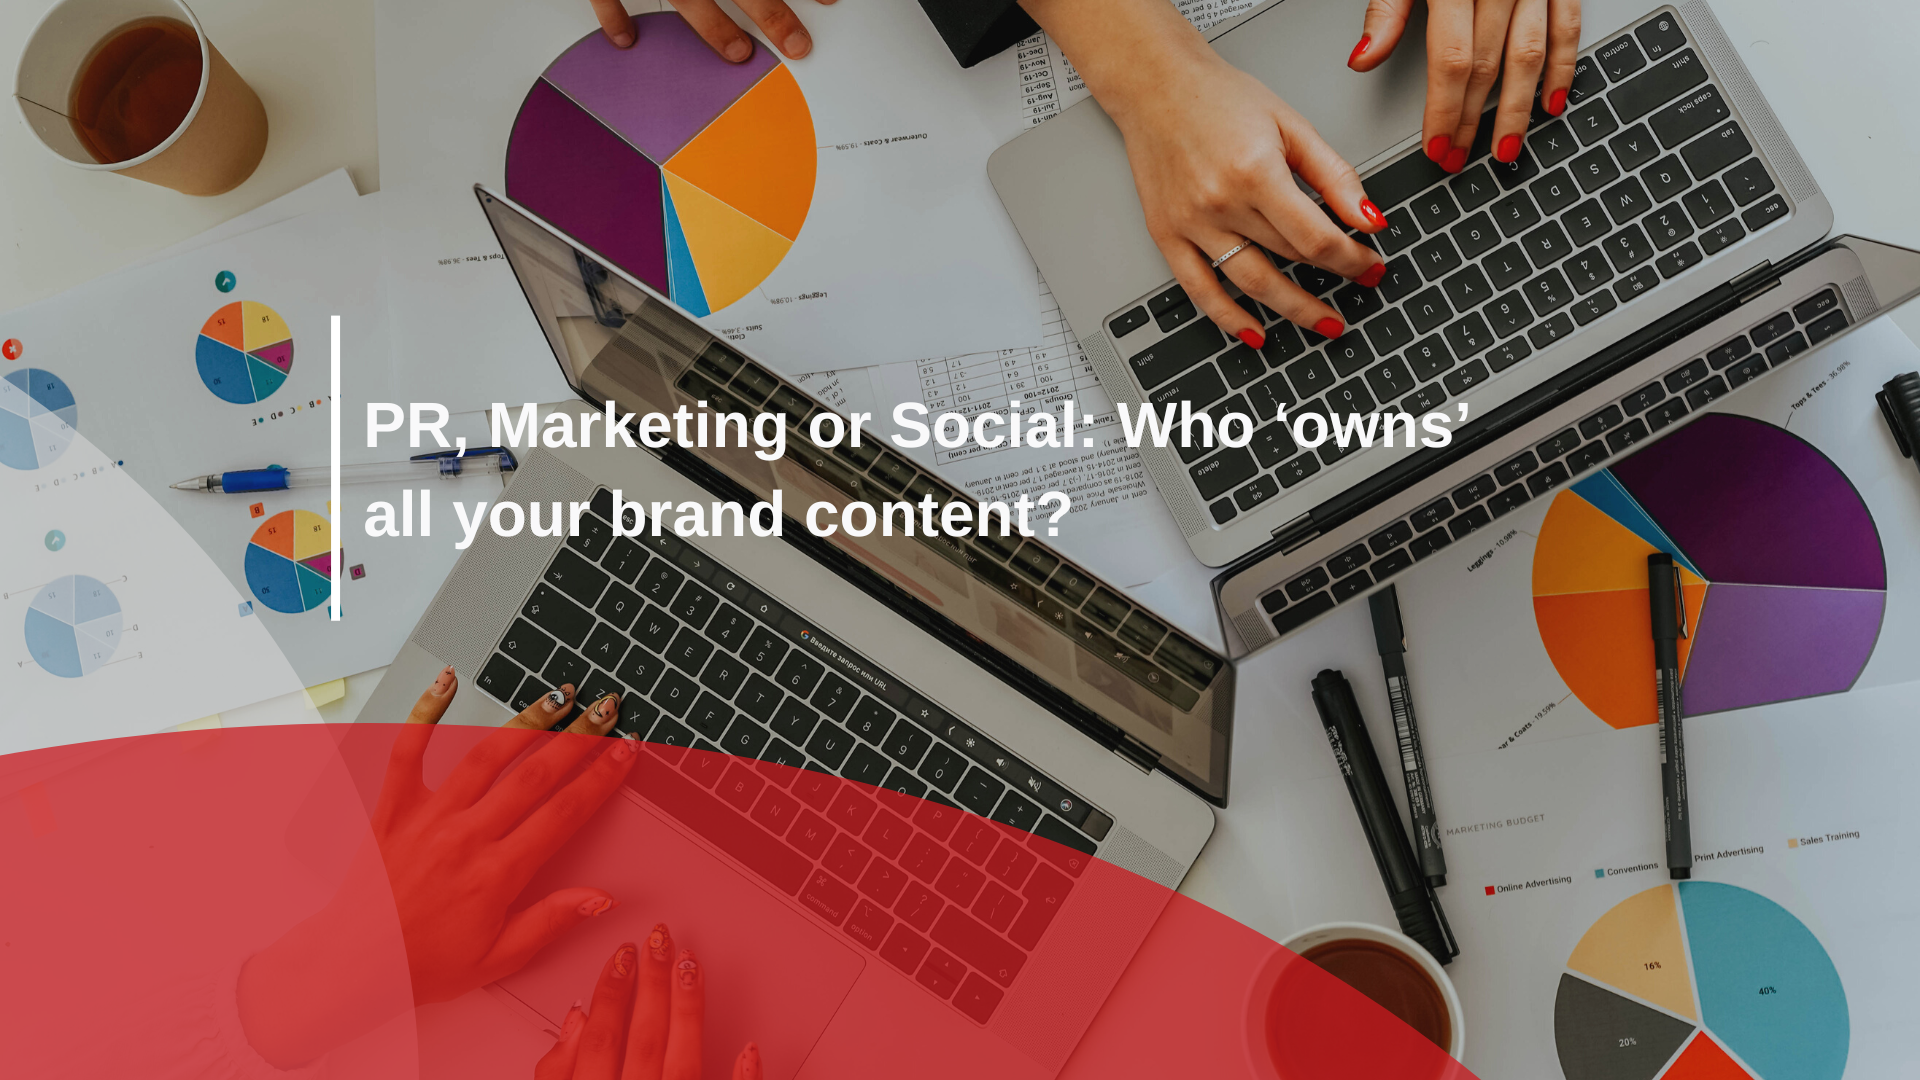 PR, Marketing or Social: Who ‘owns’ all your brand content?